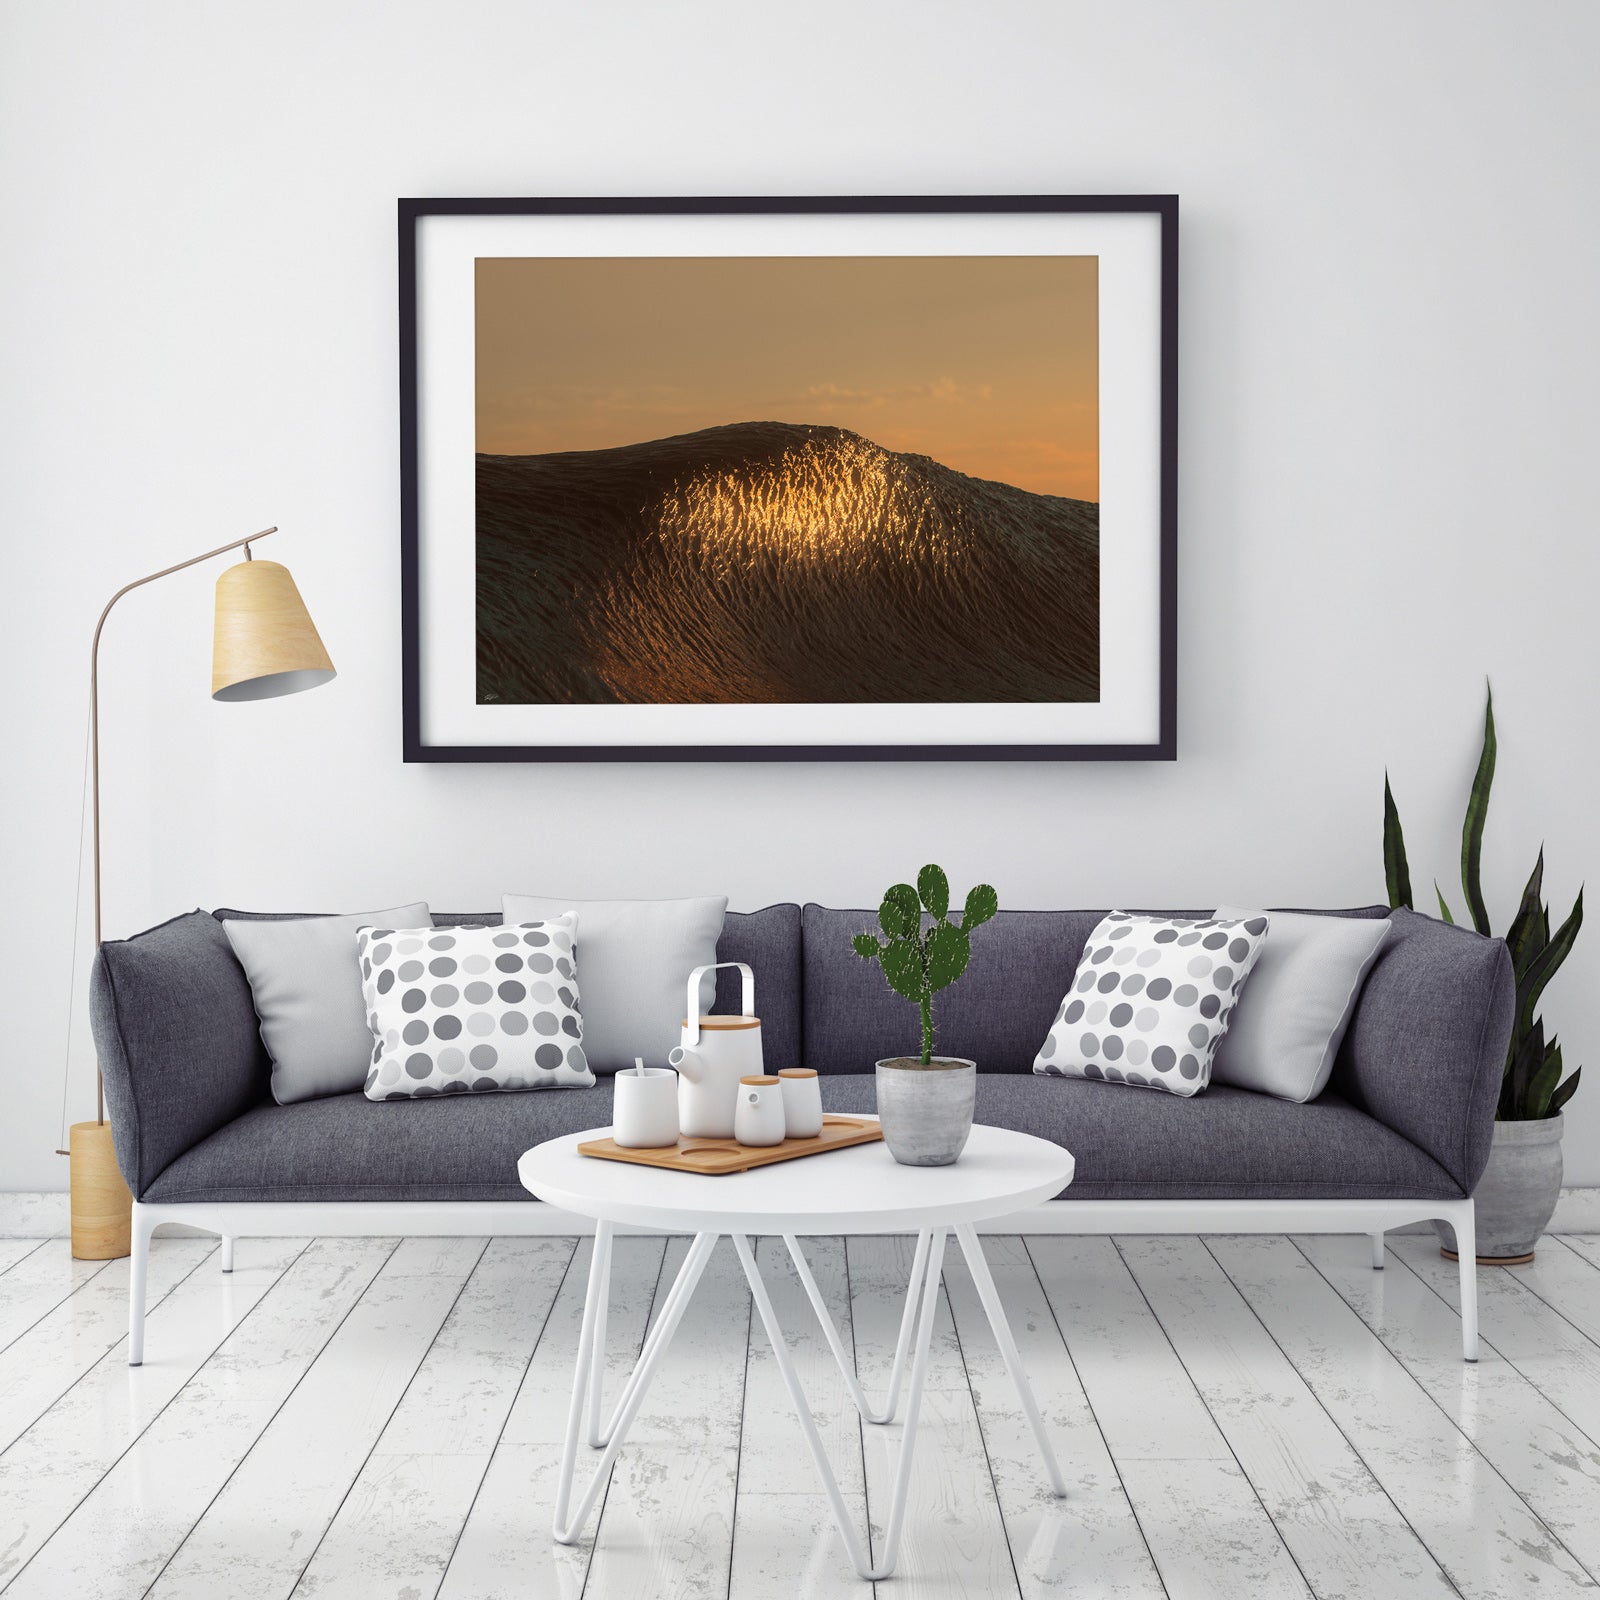 Leopard Mountain - Limited Edition Wall Art and Prints - Wave Art